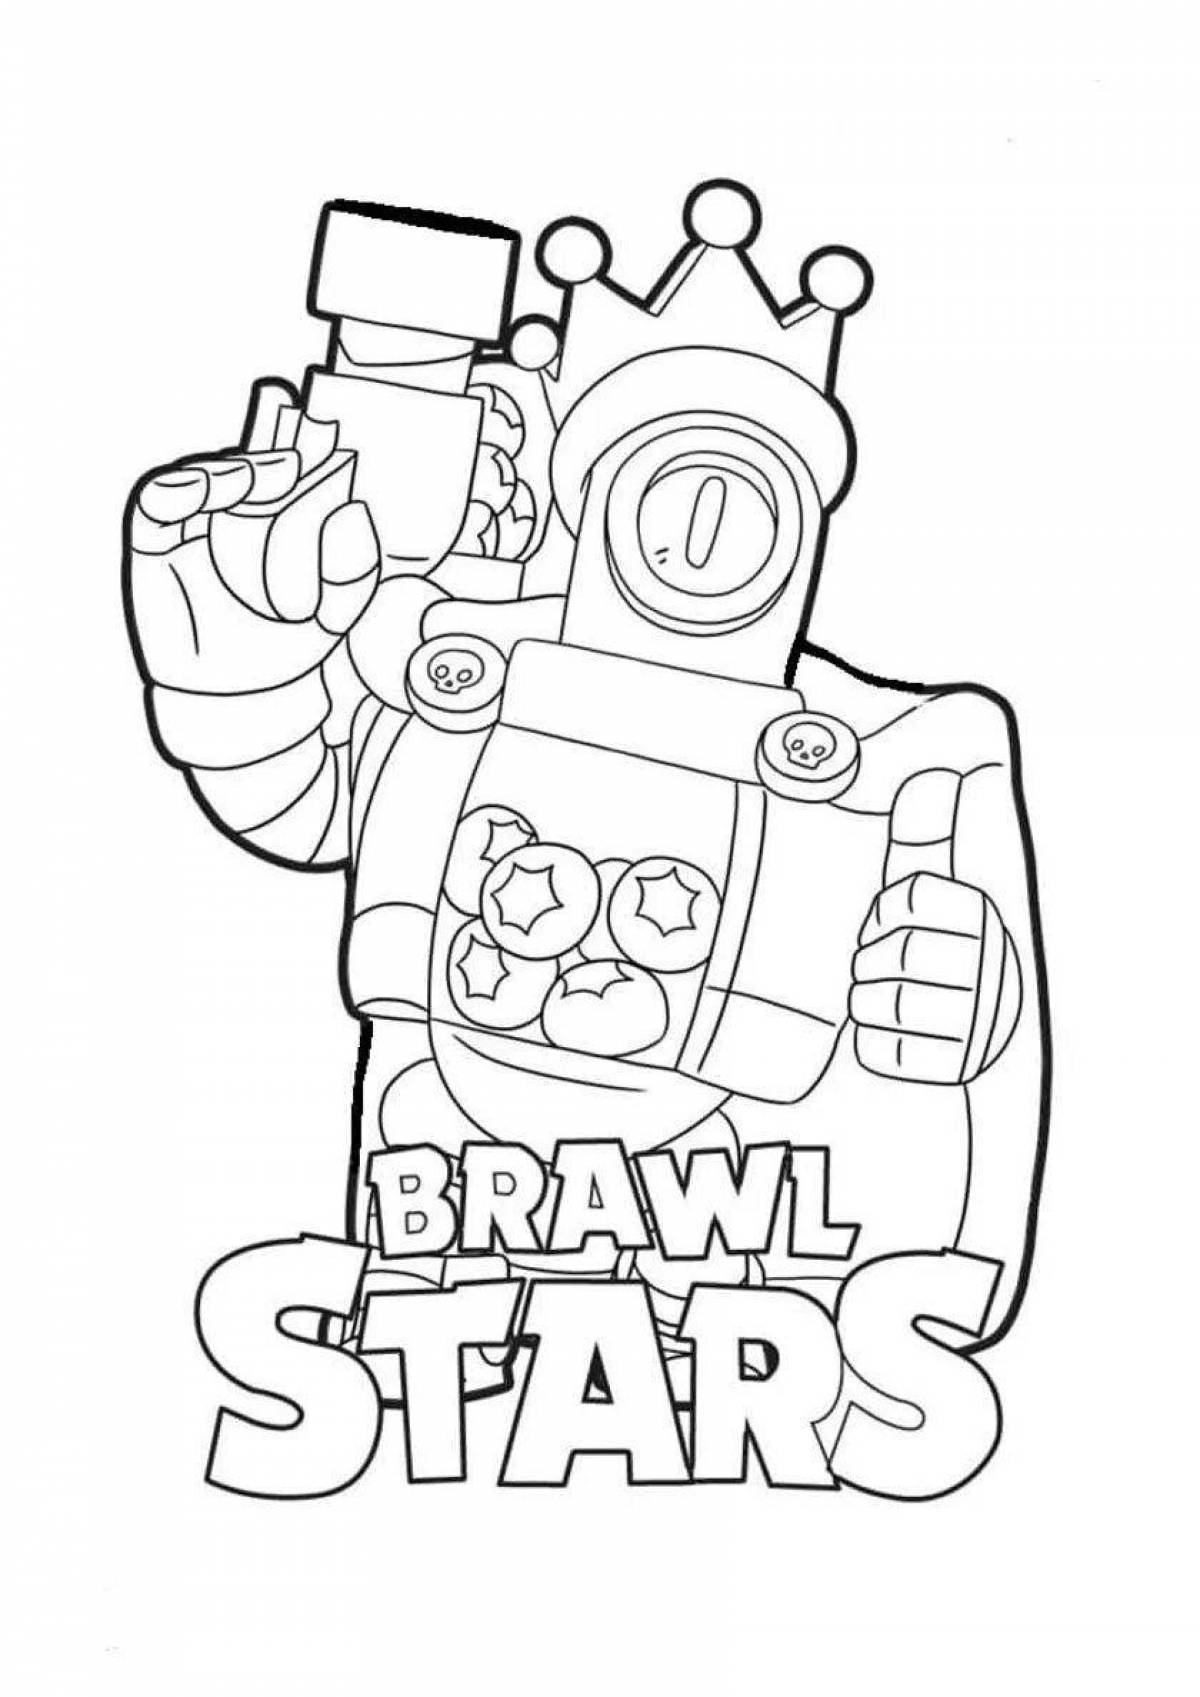 Bravo pass awesome coloring book